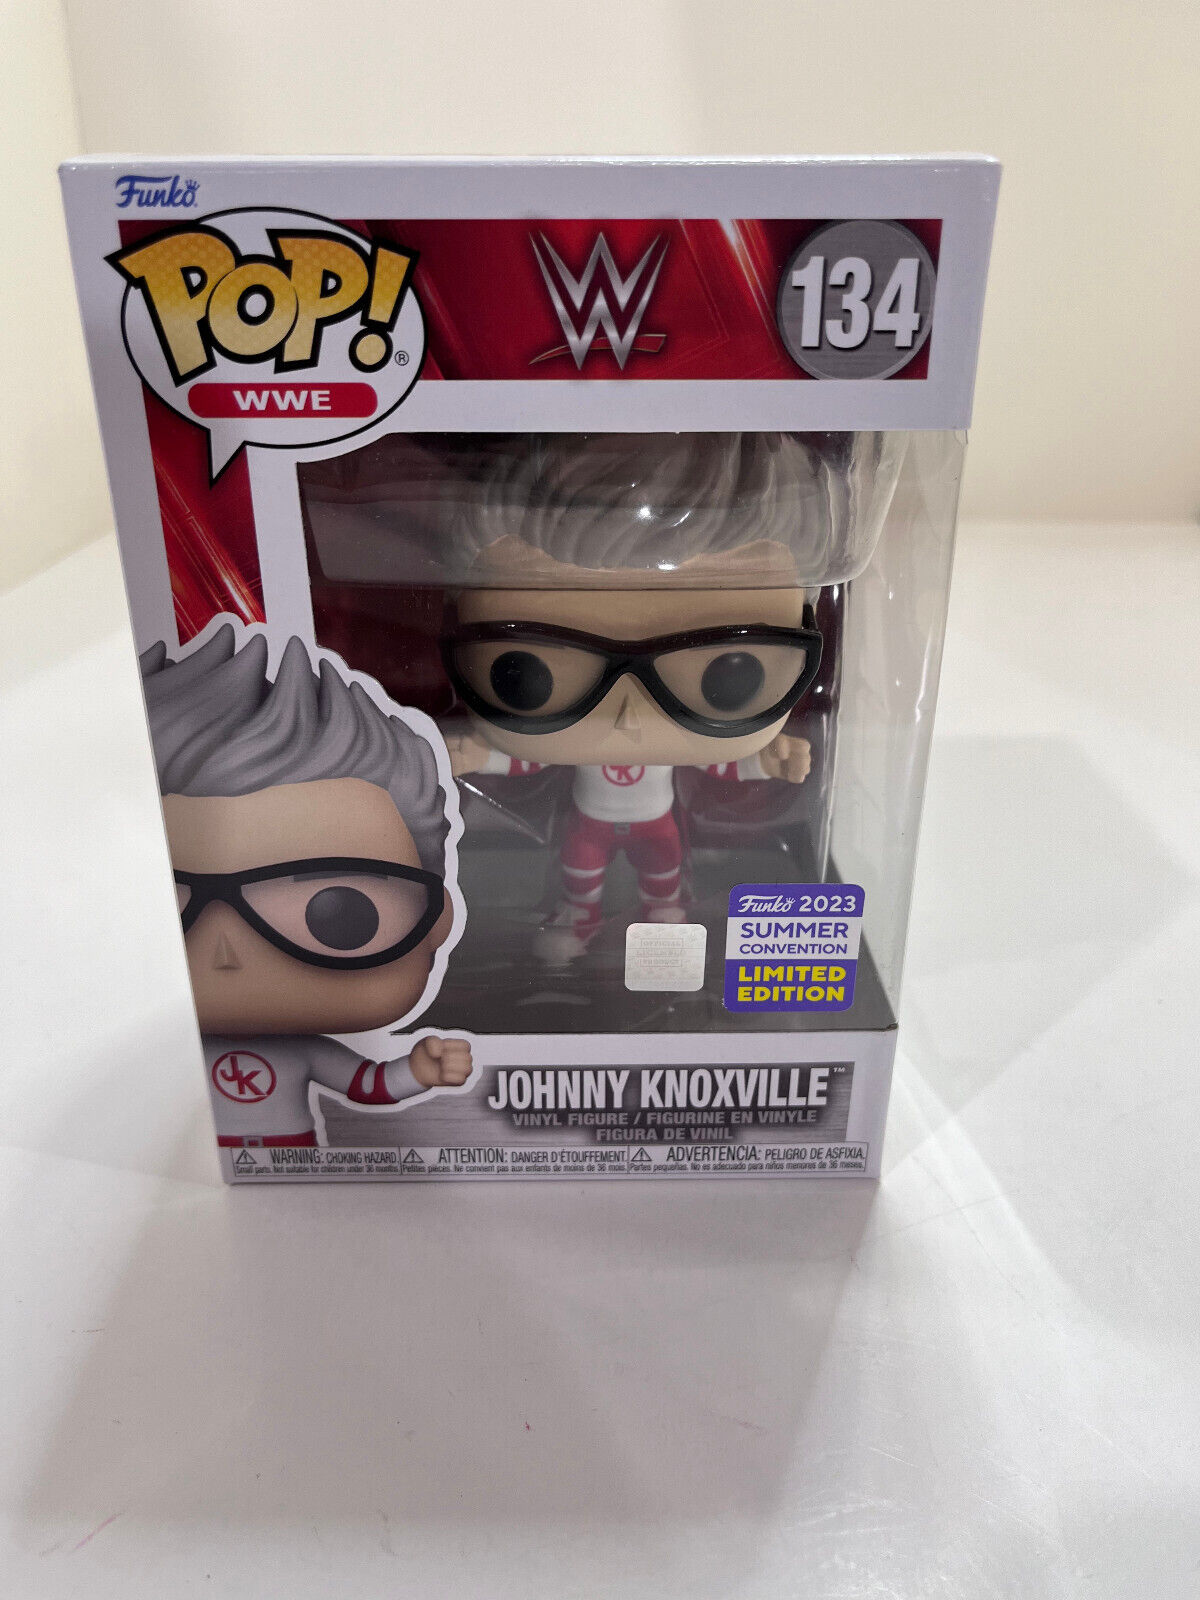 Funko Pop WWE - Johnny Knoxville #134  FUNKO 2023 CONVENTION LIM. EDITION